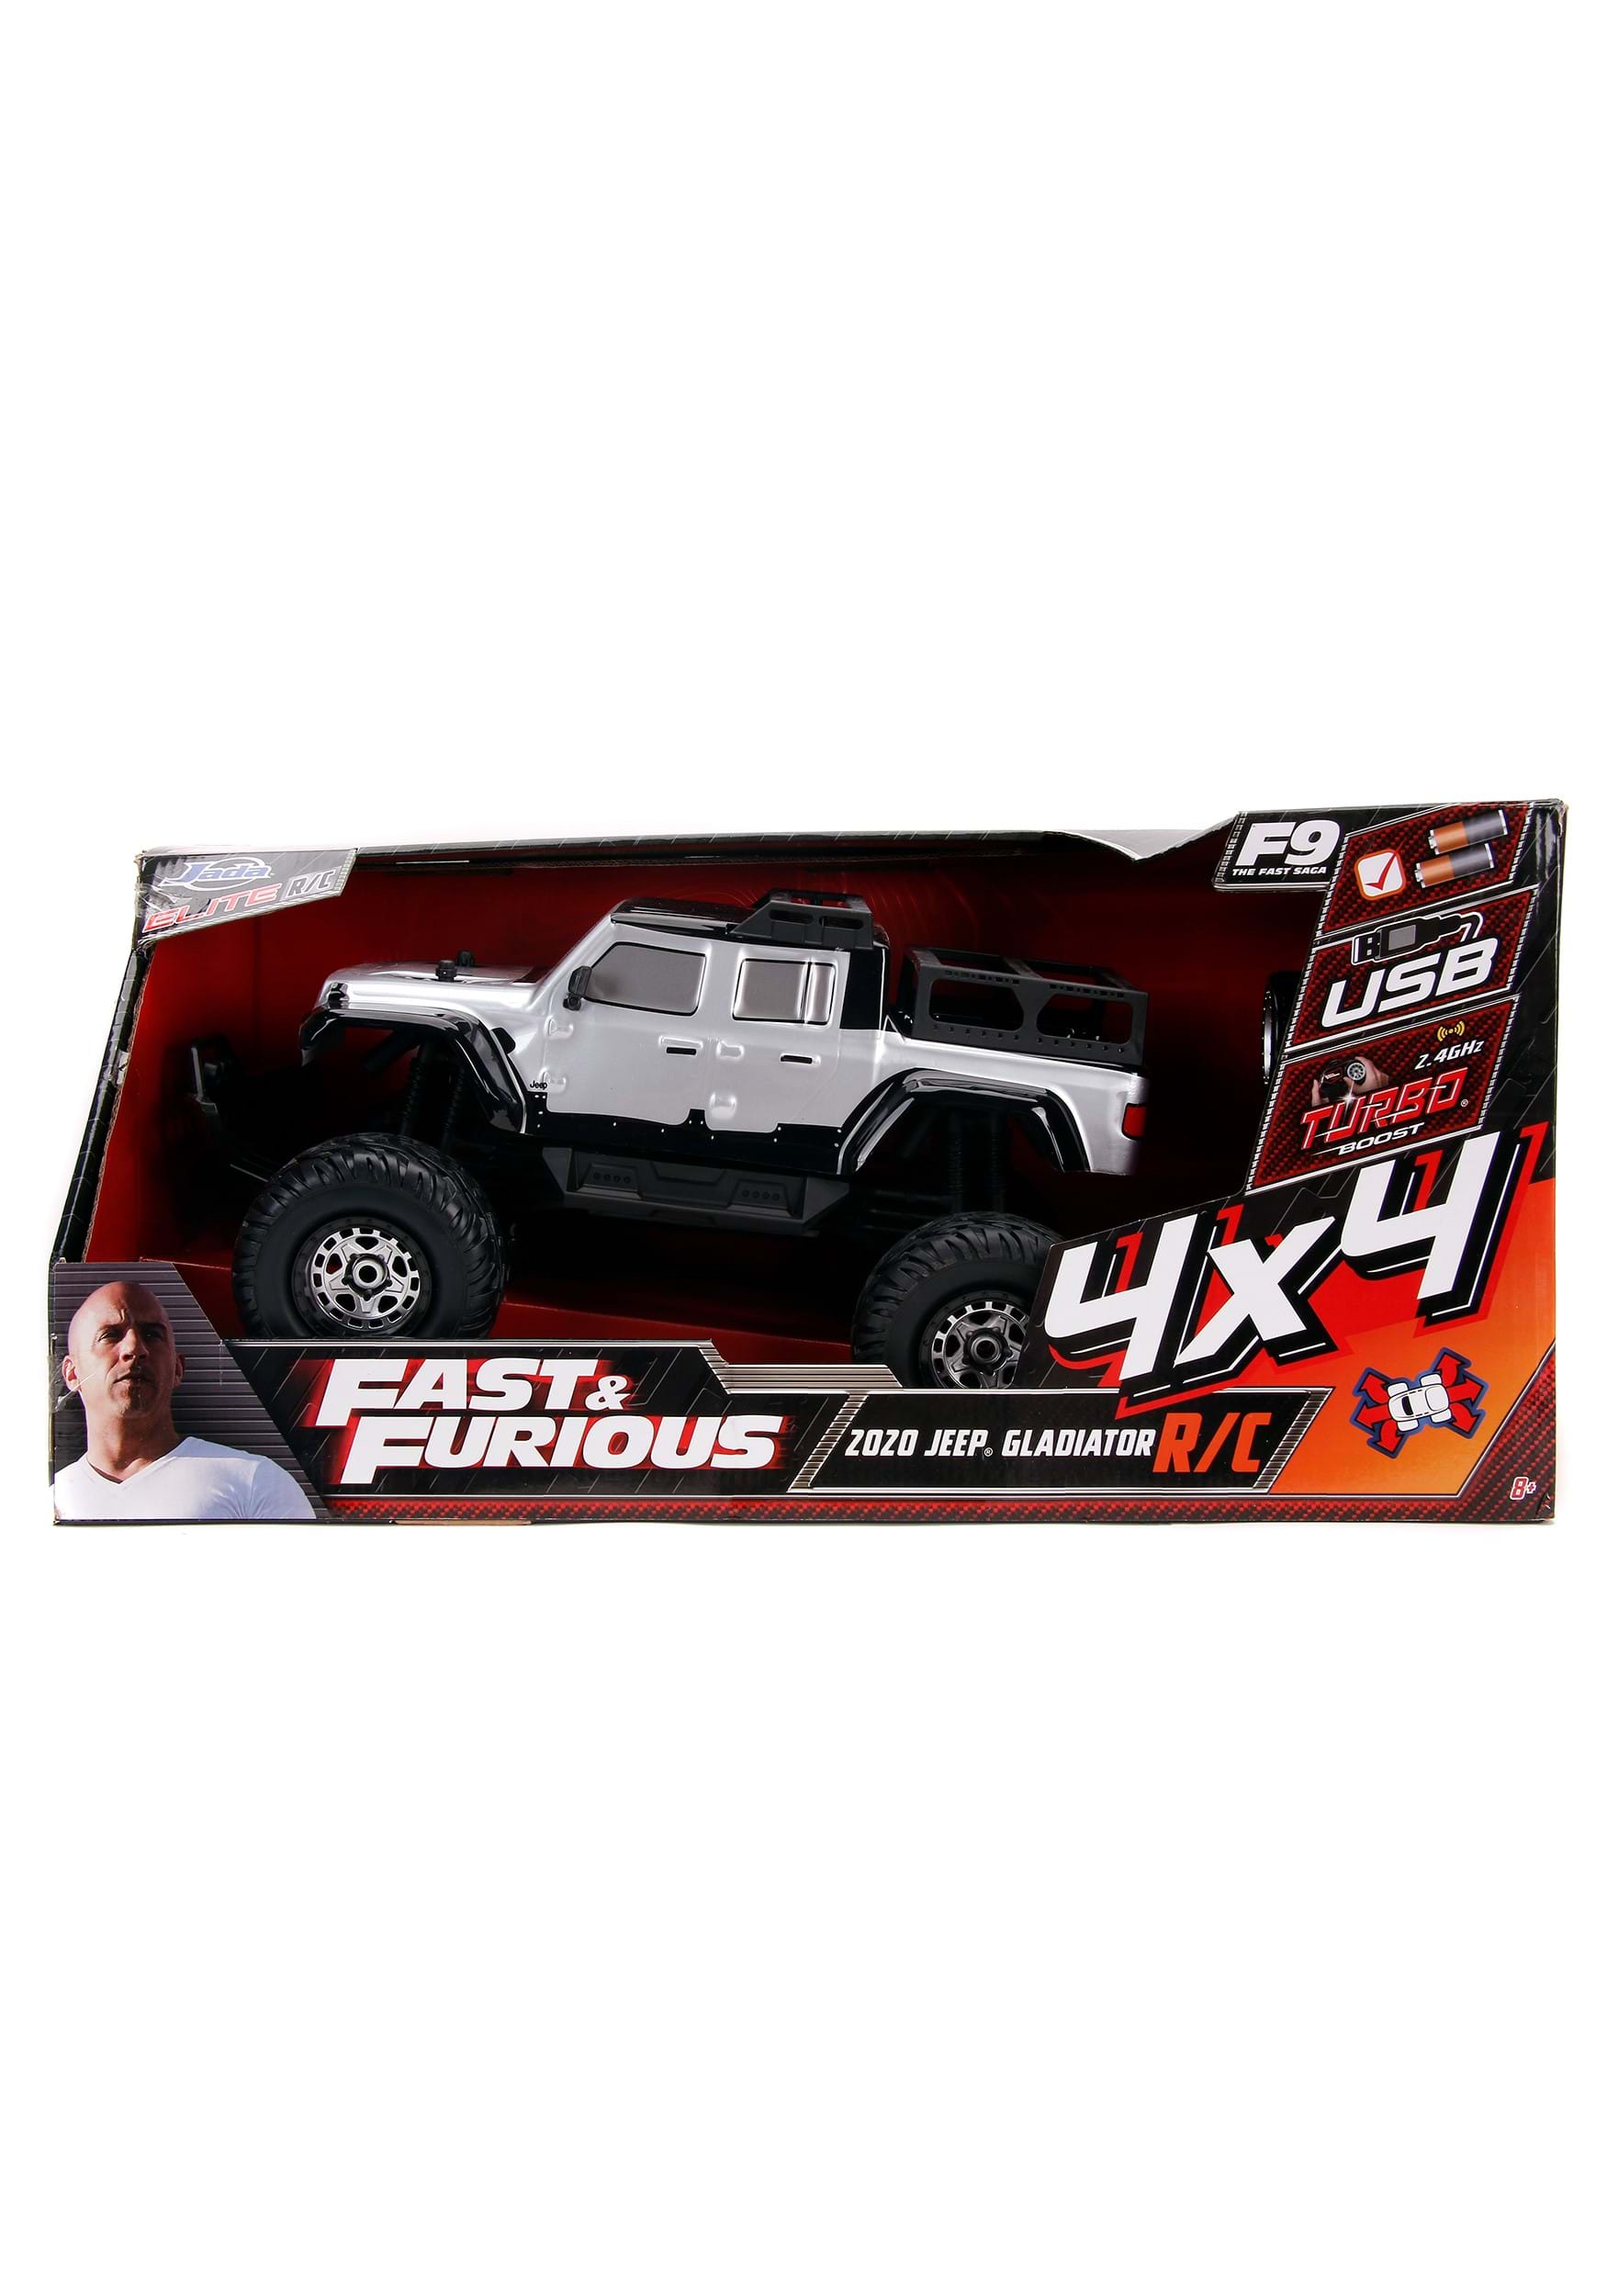 1:12 Fast & Furious Scale Elite RC '20 4X4 Jeep Gladiator